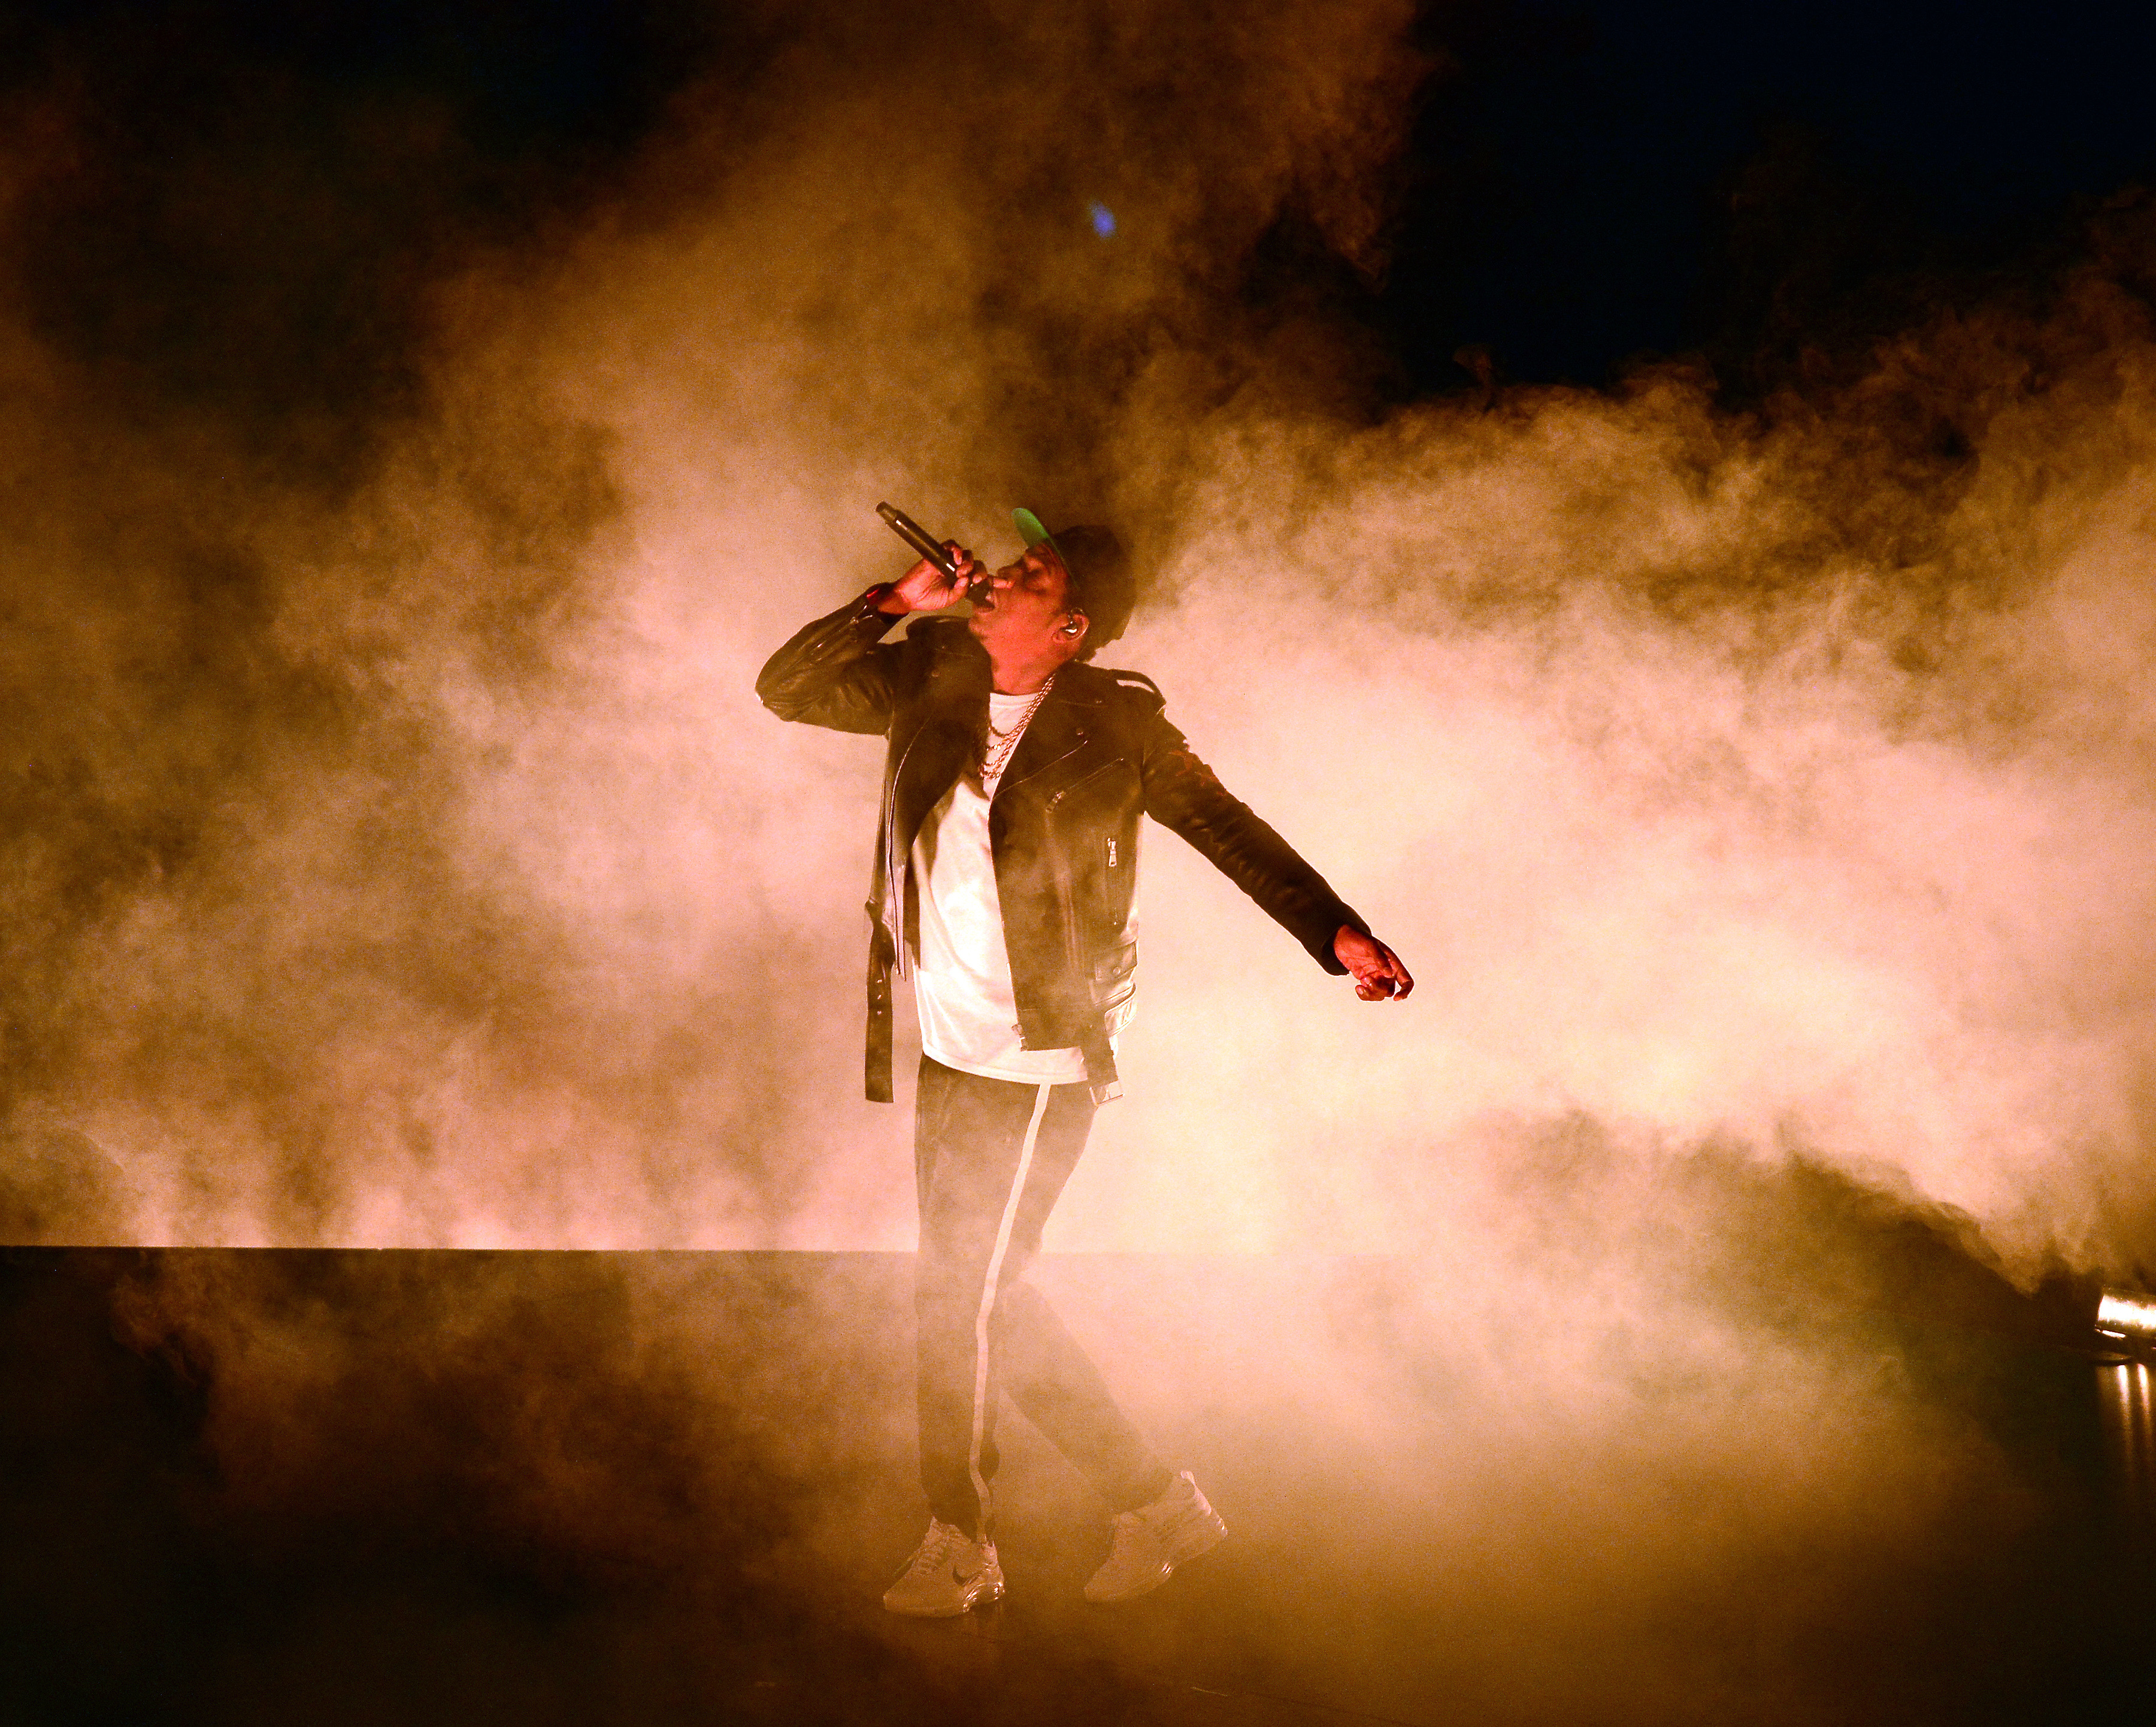 The Most Influential Artists: #24 Jay-Z